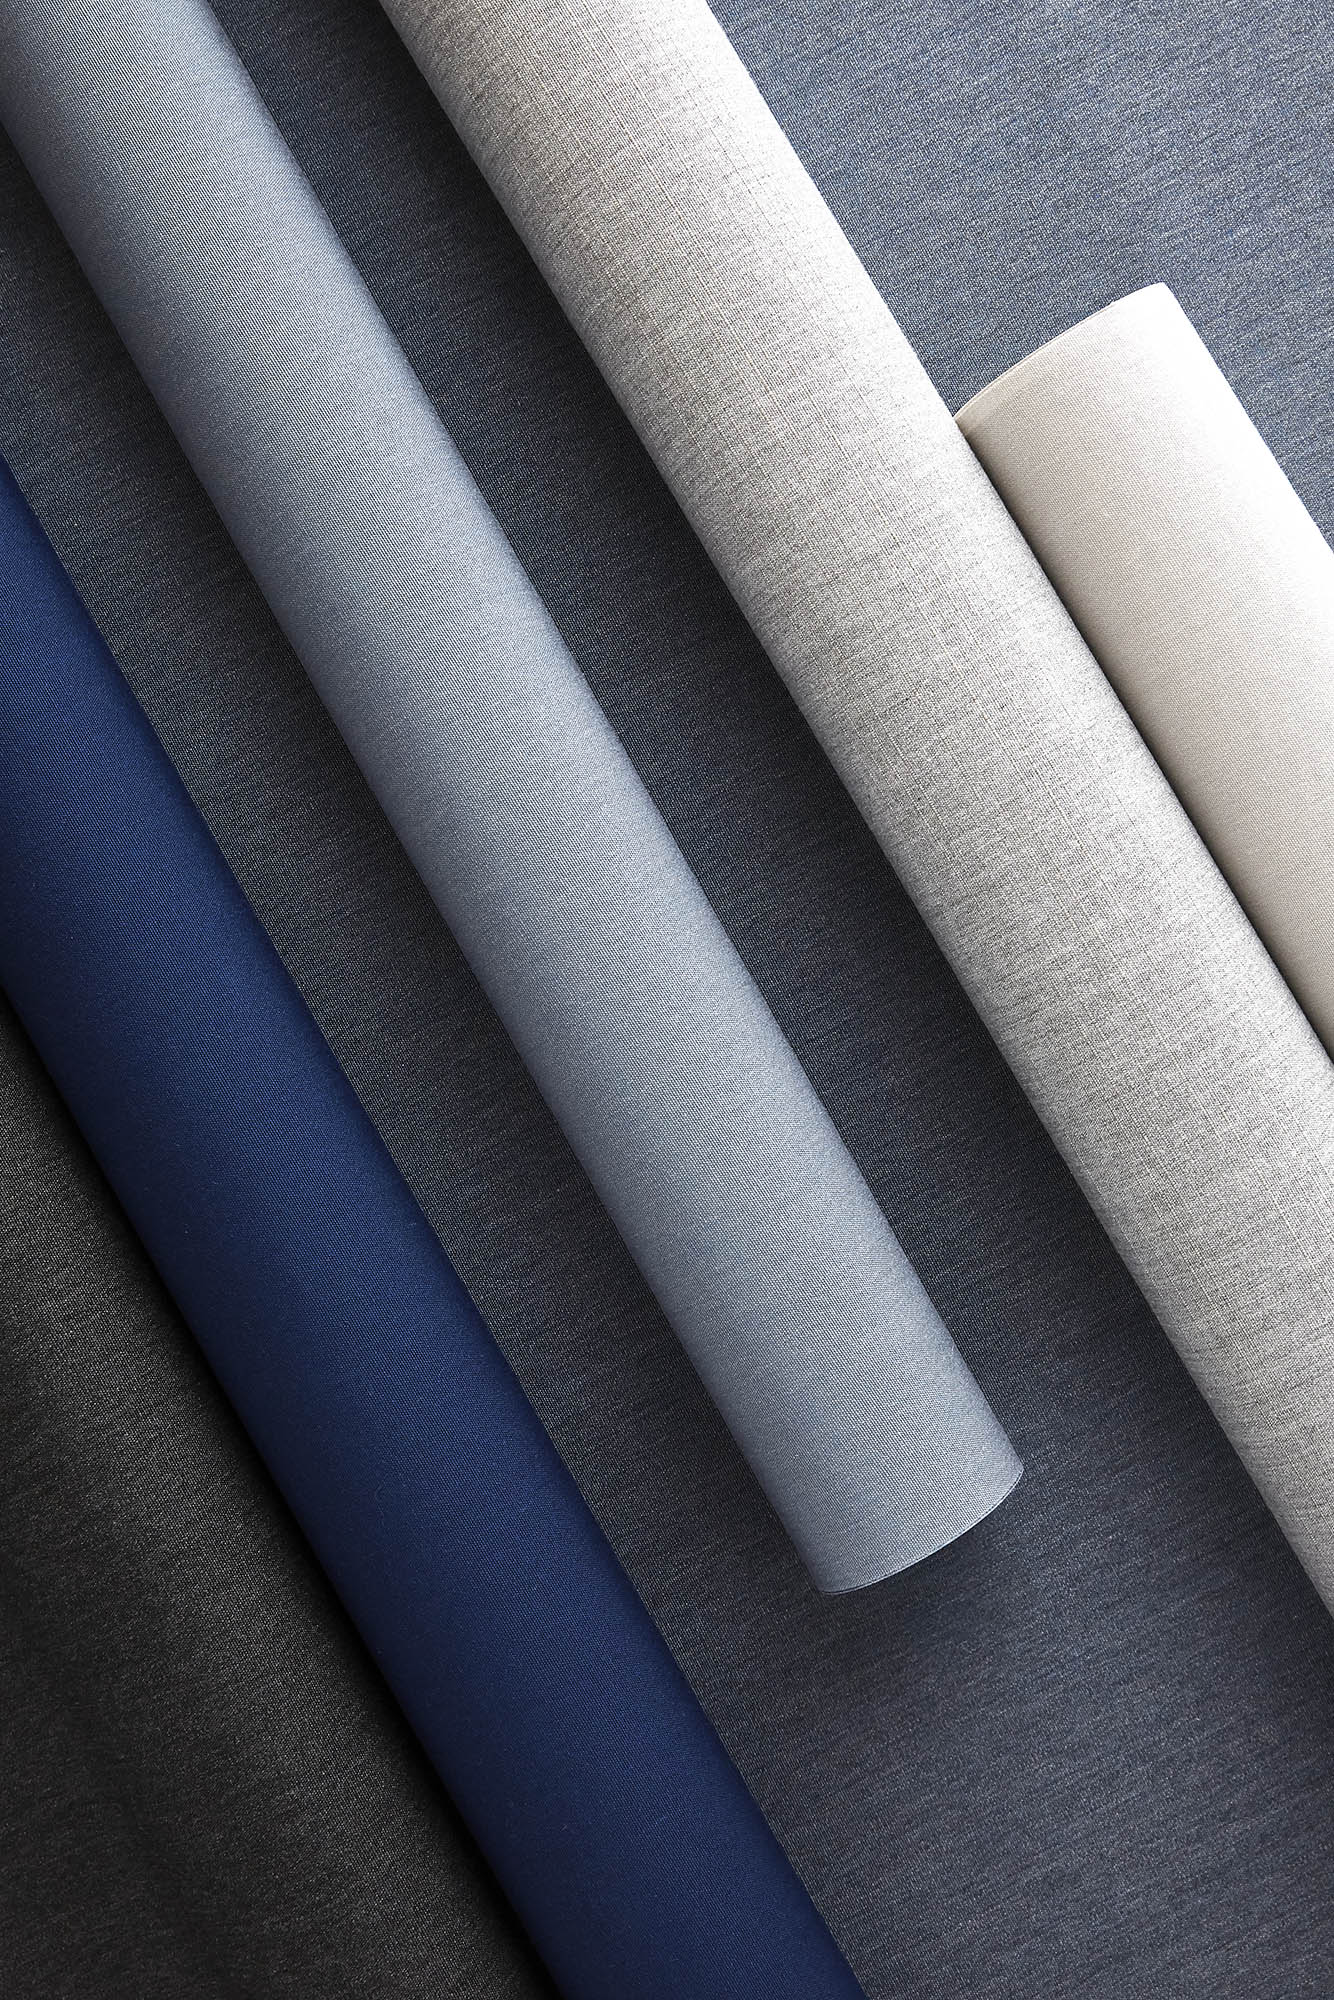 Sunbrella shade fabrics featuring the new solids of Cloud, Midnight and Slate Blue